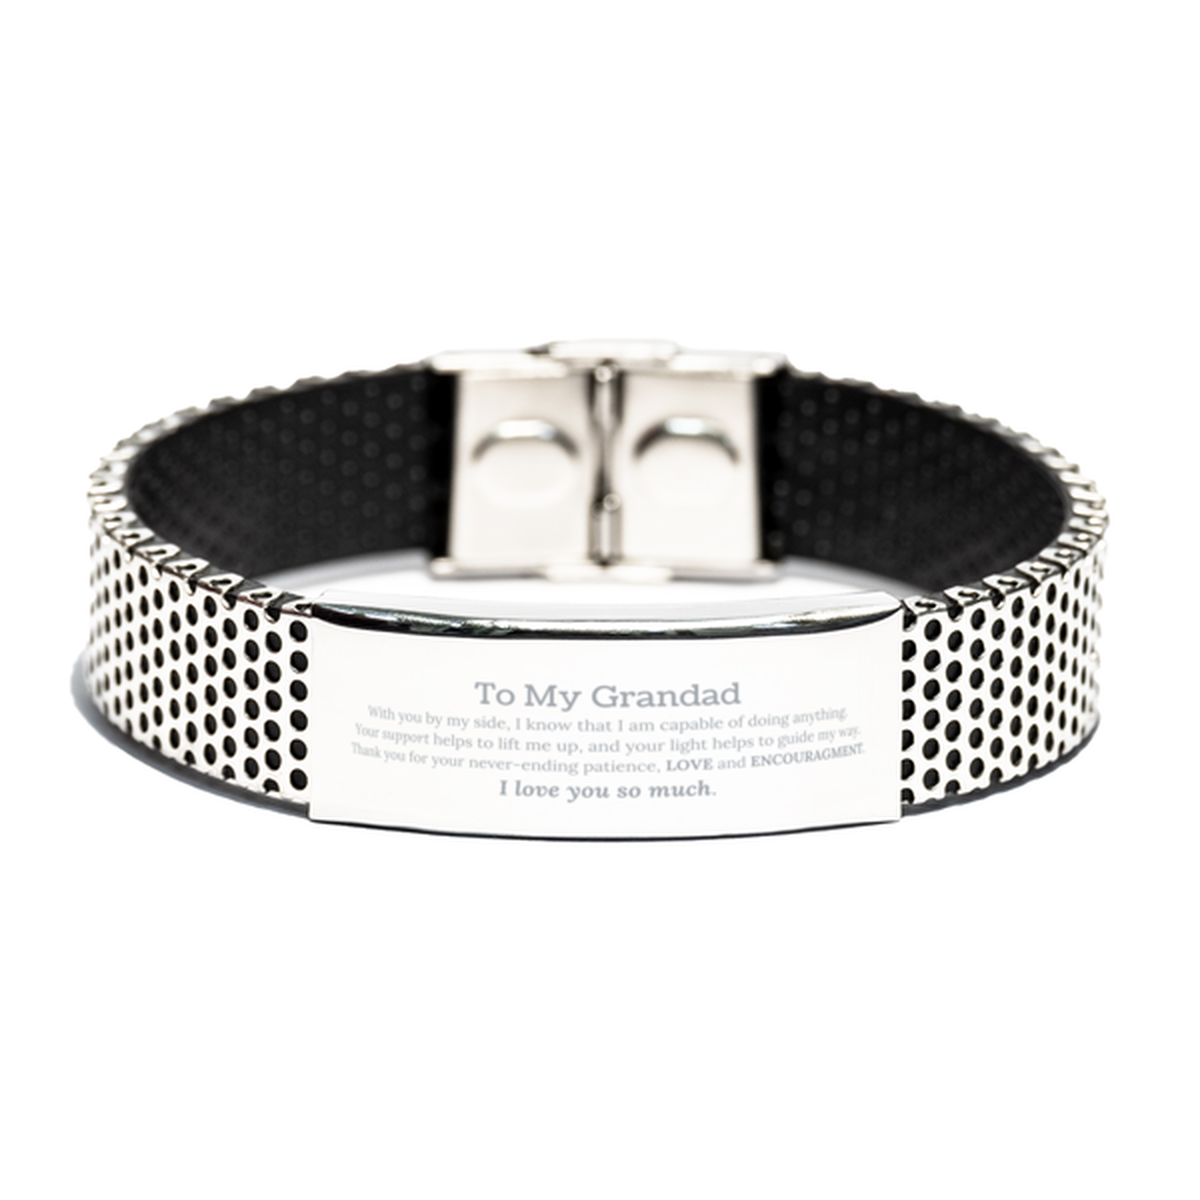 Appreciation Grandad Stainless Steel Bracelet Gifts, To My Grandad Birthday Christmas Wedding Keepsake Gifts for Grandad With you by my side, I know that I am capable of doing anything. I love you so much